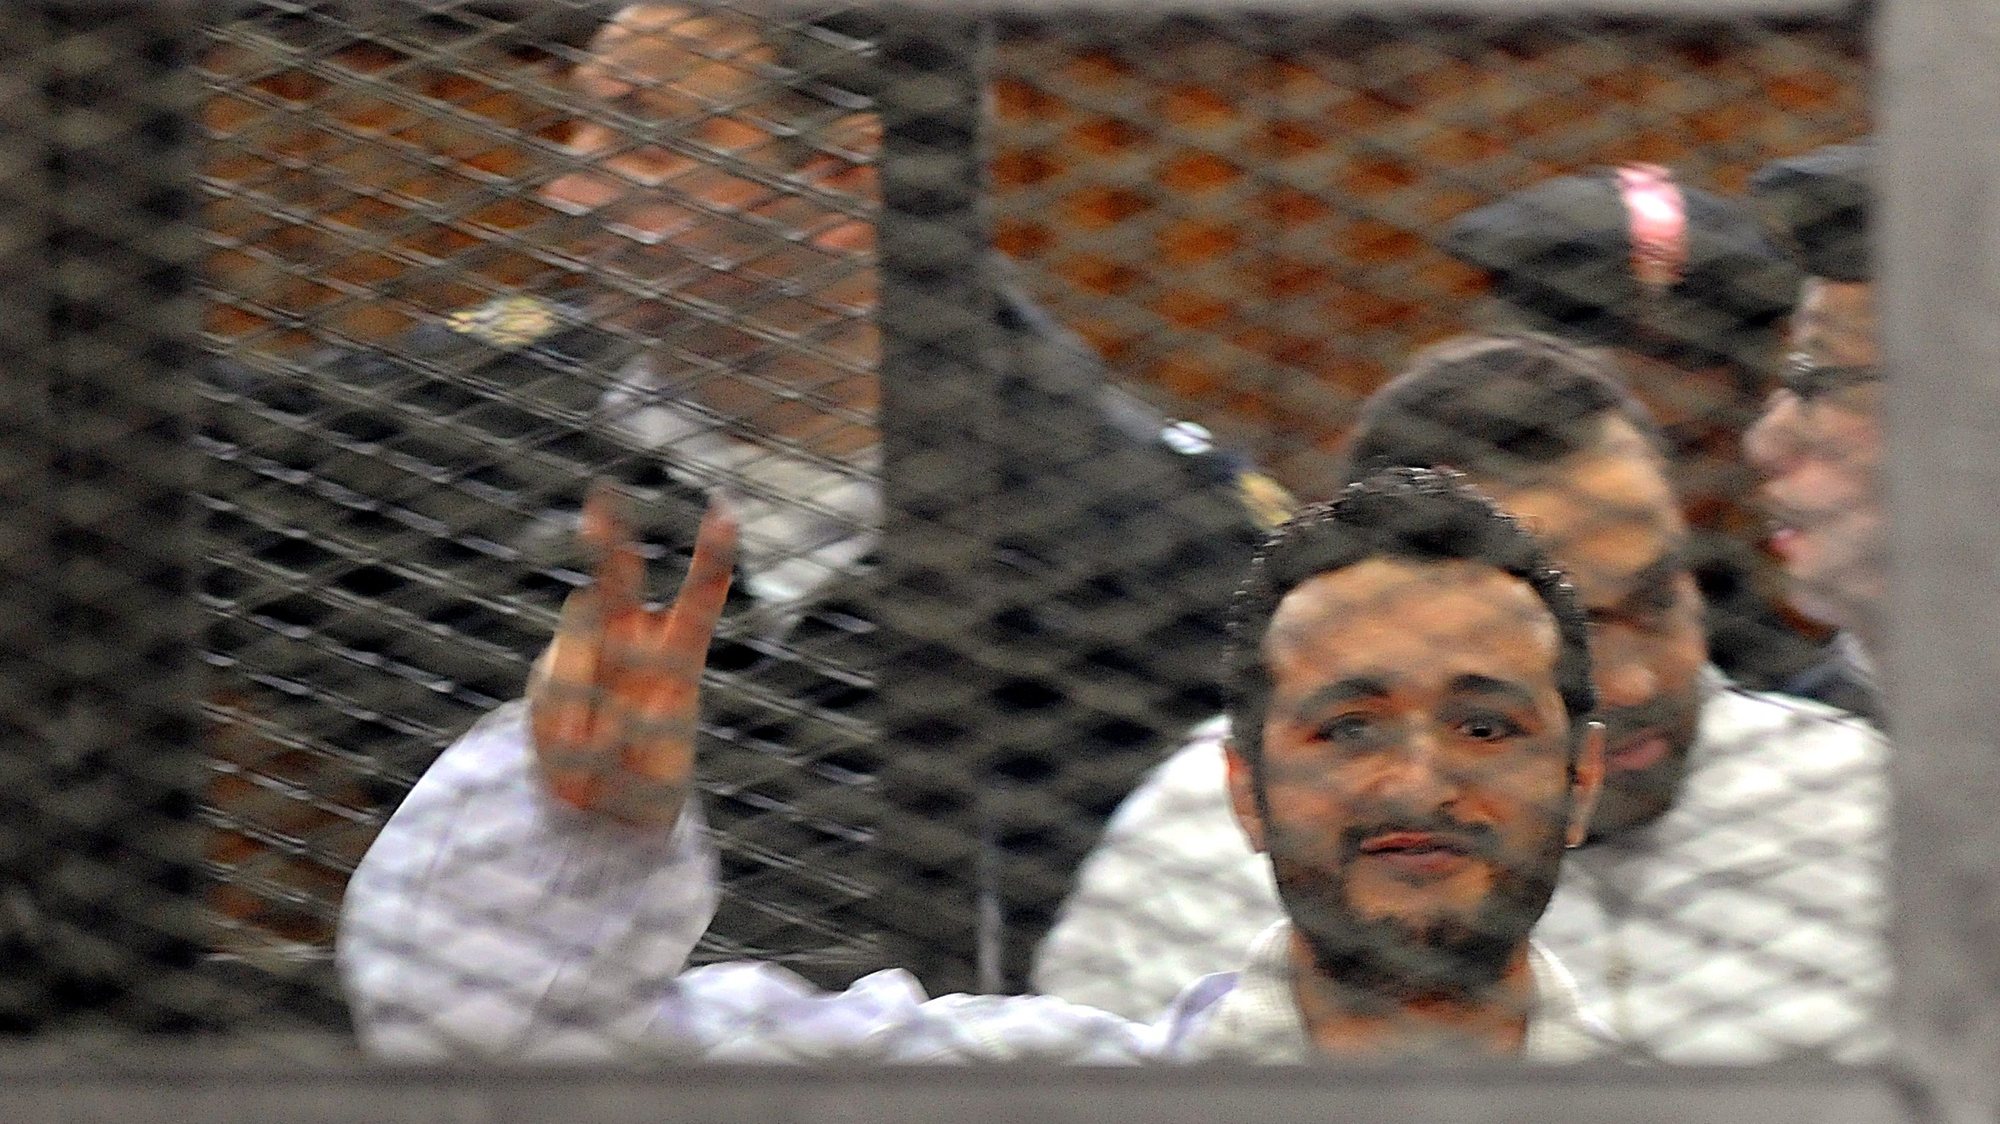 epa04157802 (FILE) A file photo dated 22 December 2013 shows Egyptian activist Ahmed Douma flashing victory sign behind dock bars during his trial in Cairo, Egypt. A Cairo court on 07 April 2014 rejected an appeal by three Egyptian activists against a three-year jail sentence for holding an unauthorized demonstration. Ahmed Maher, founder of the April 6 Youth Movement which played a key role in the 2011 uprising against long-time ruler Hosni Mubarak, and two other activists, Ahmed Douma and Mohamed Adel, were convicted in December of organizing an unauthorized protest and attacking police.  EPA/FOAD GARNOSY ELMAGD / ALMASRY AL BEST QUALITY AVAILABLE - EGYPT OUT